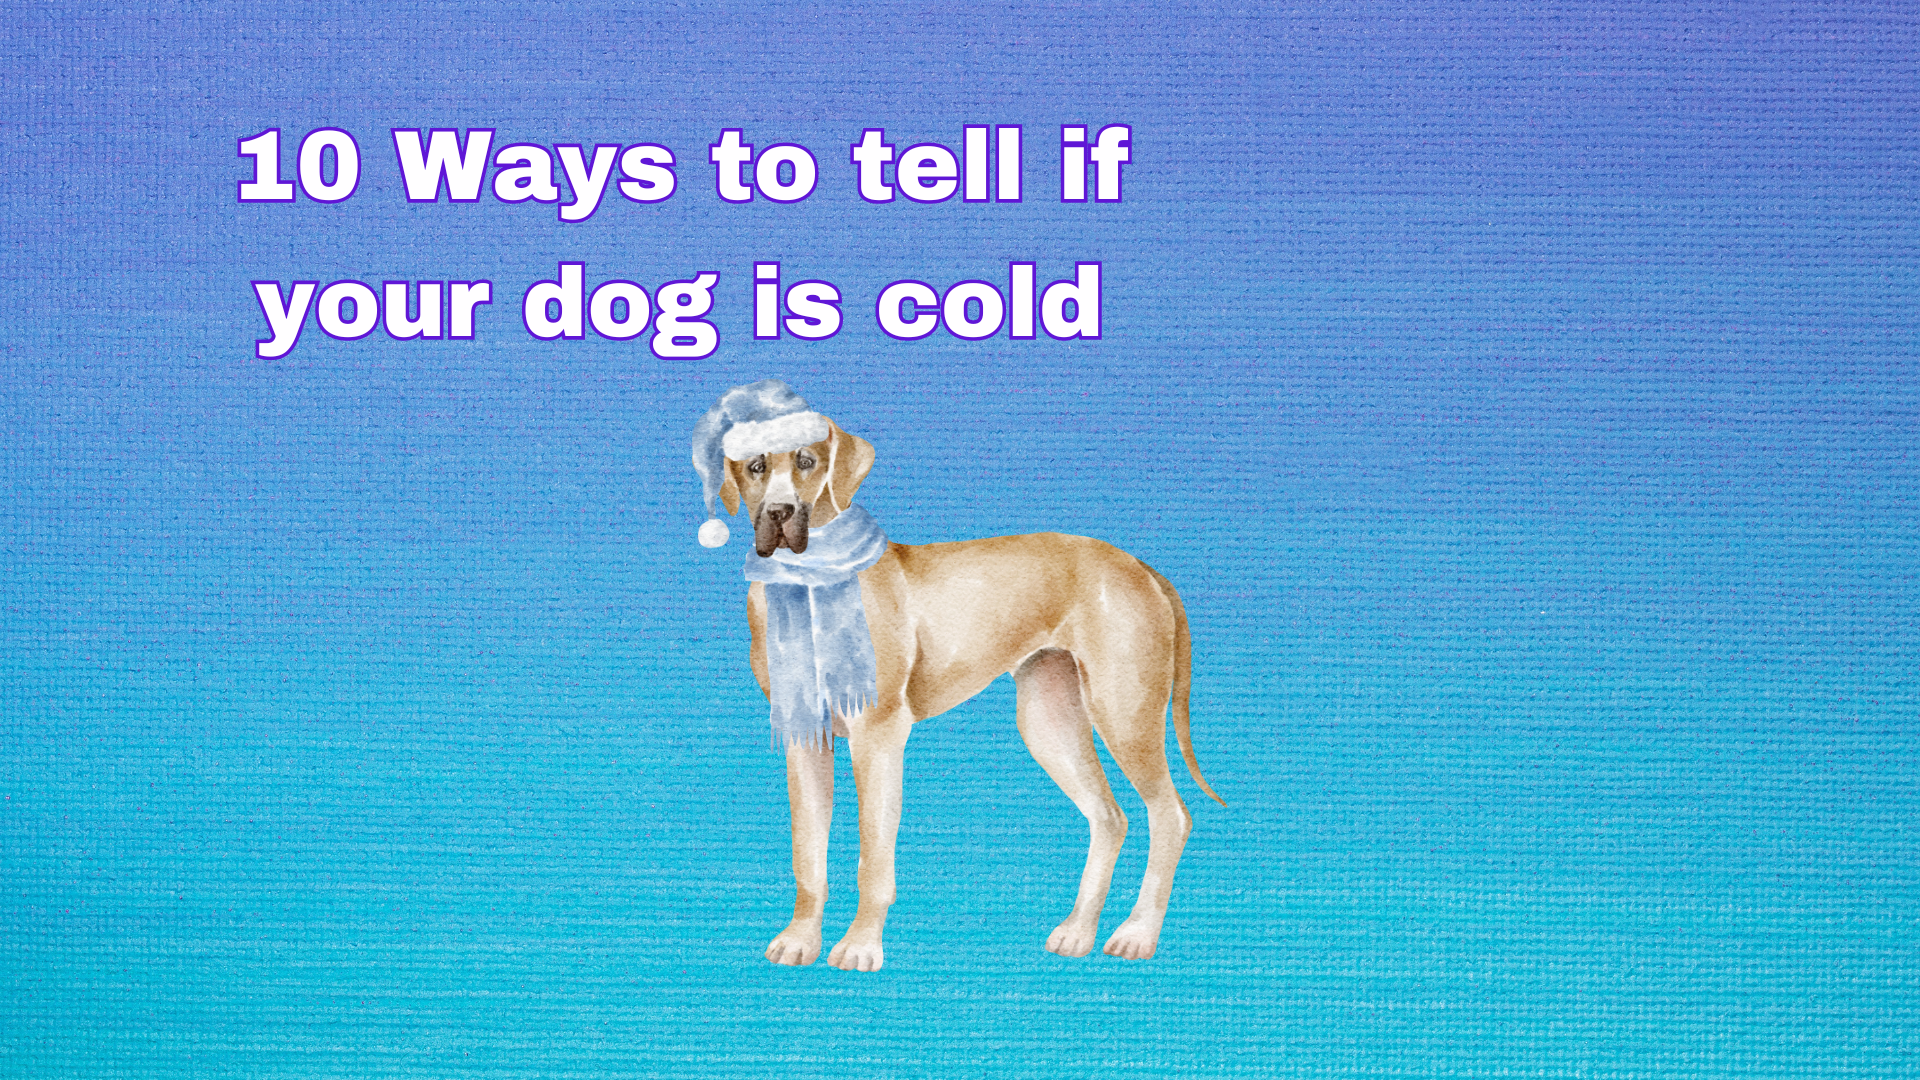 10 Ways to tell if your dog is cold